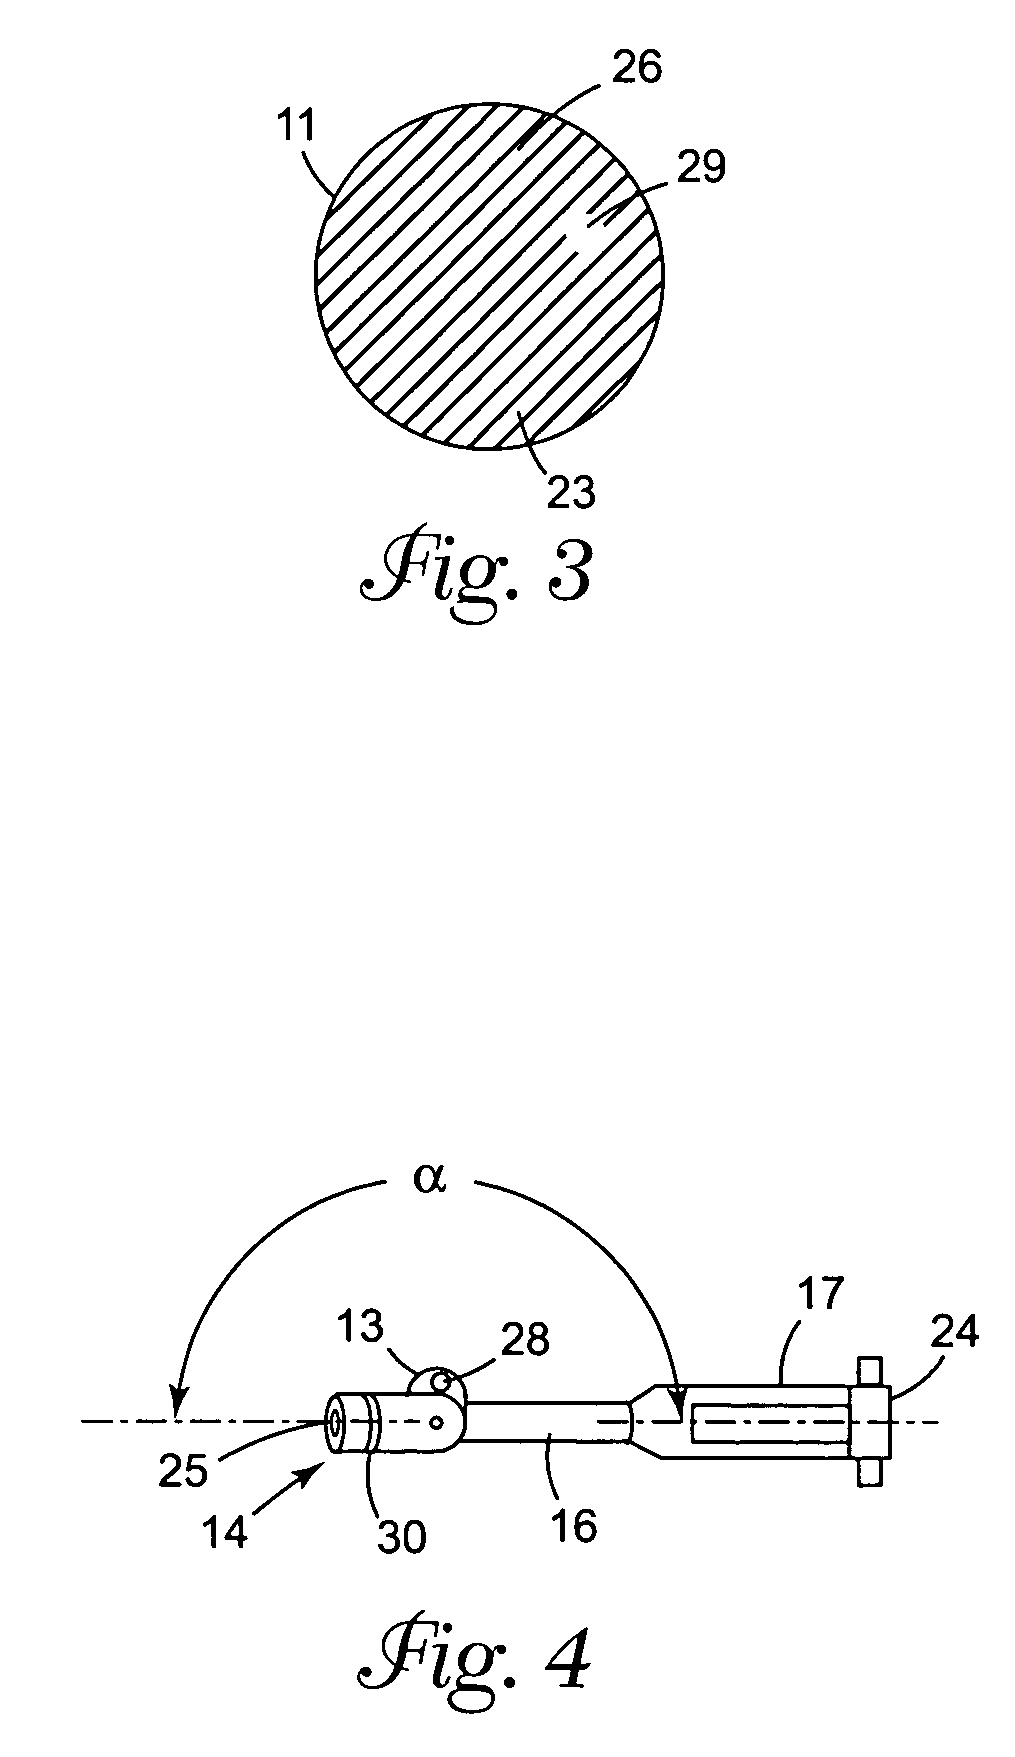 System and method for accessing the coronary sinus